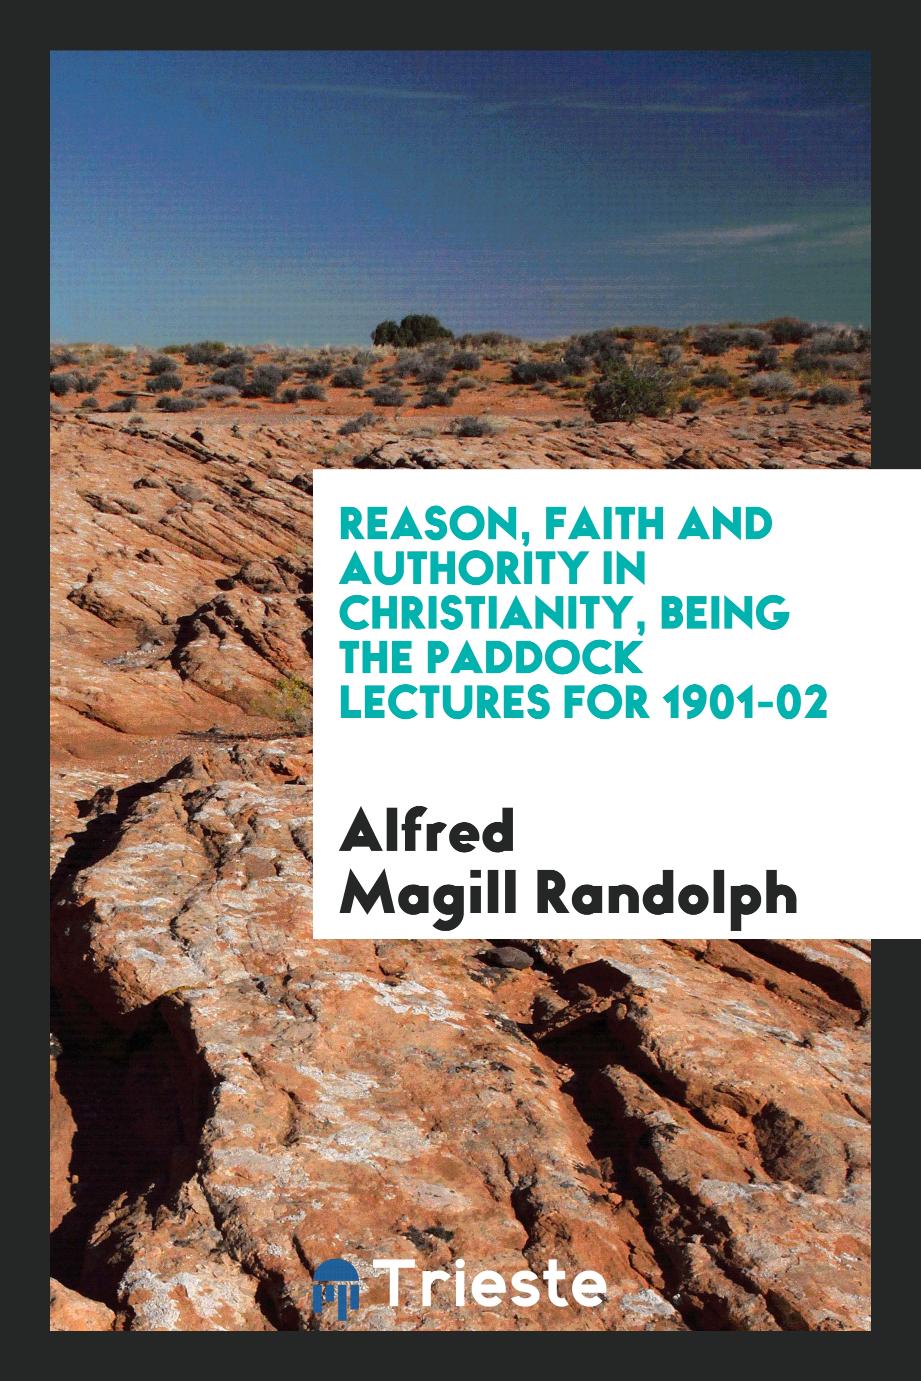 Reason, faith and authority in Christianity, being the Paddock lectures for 1901-02